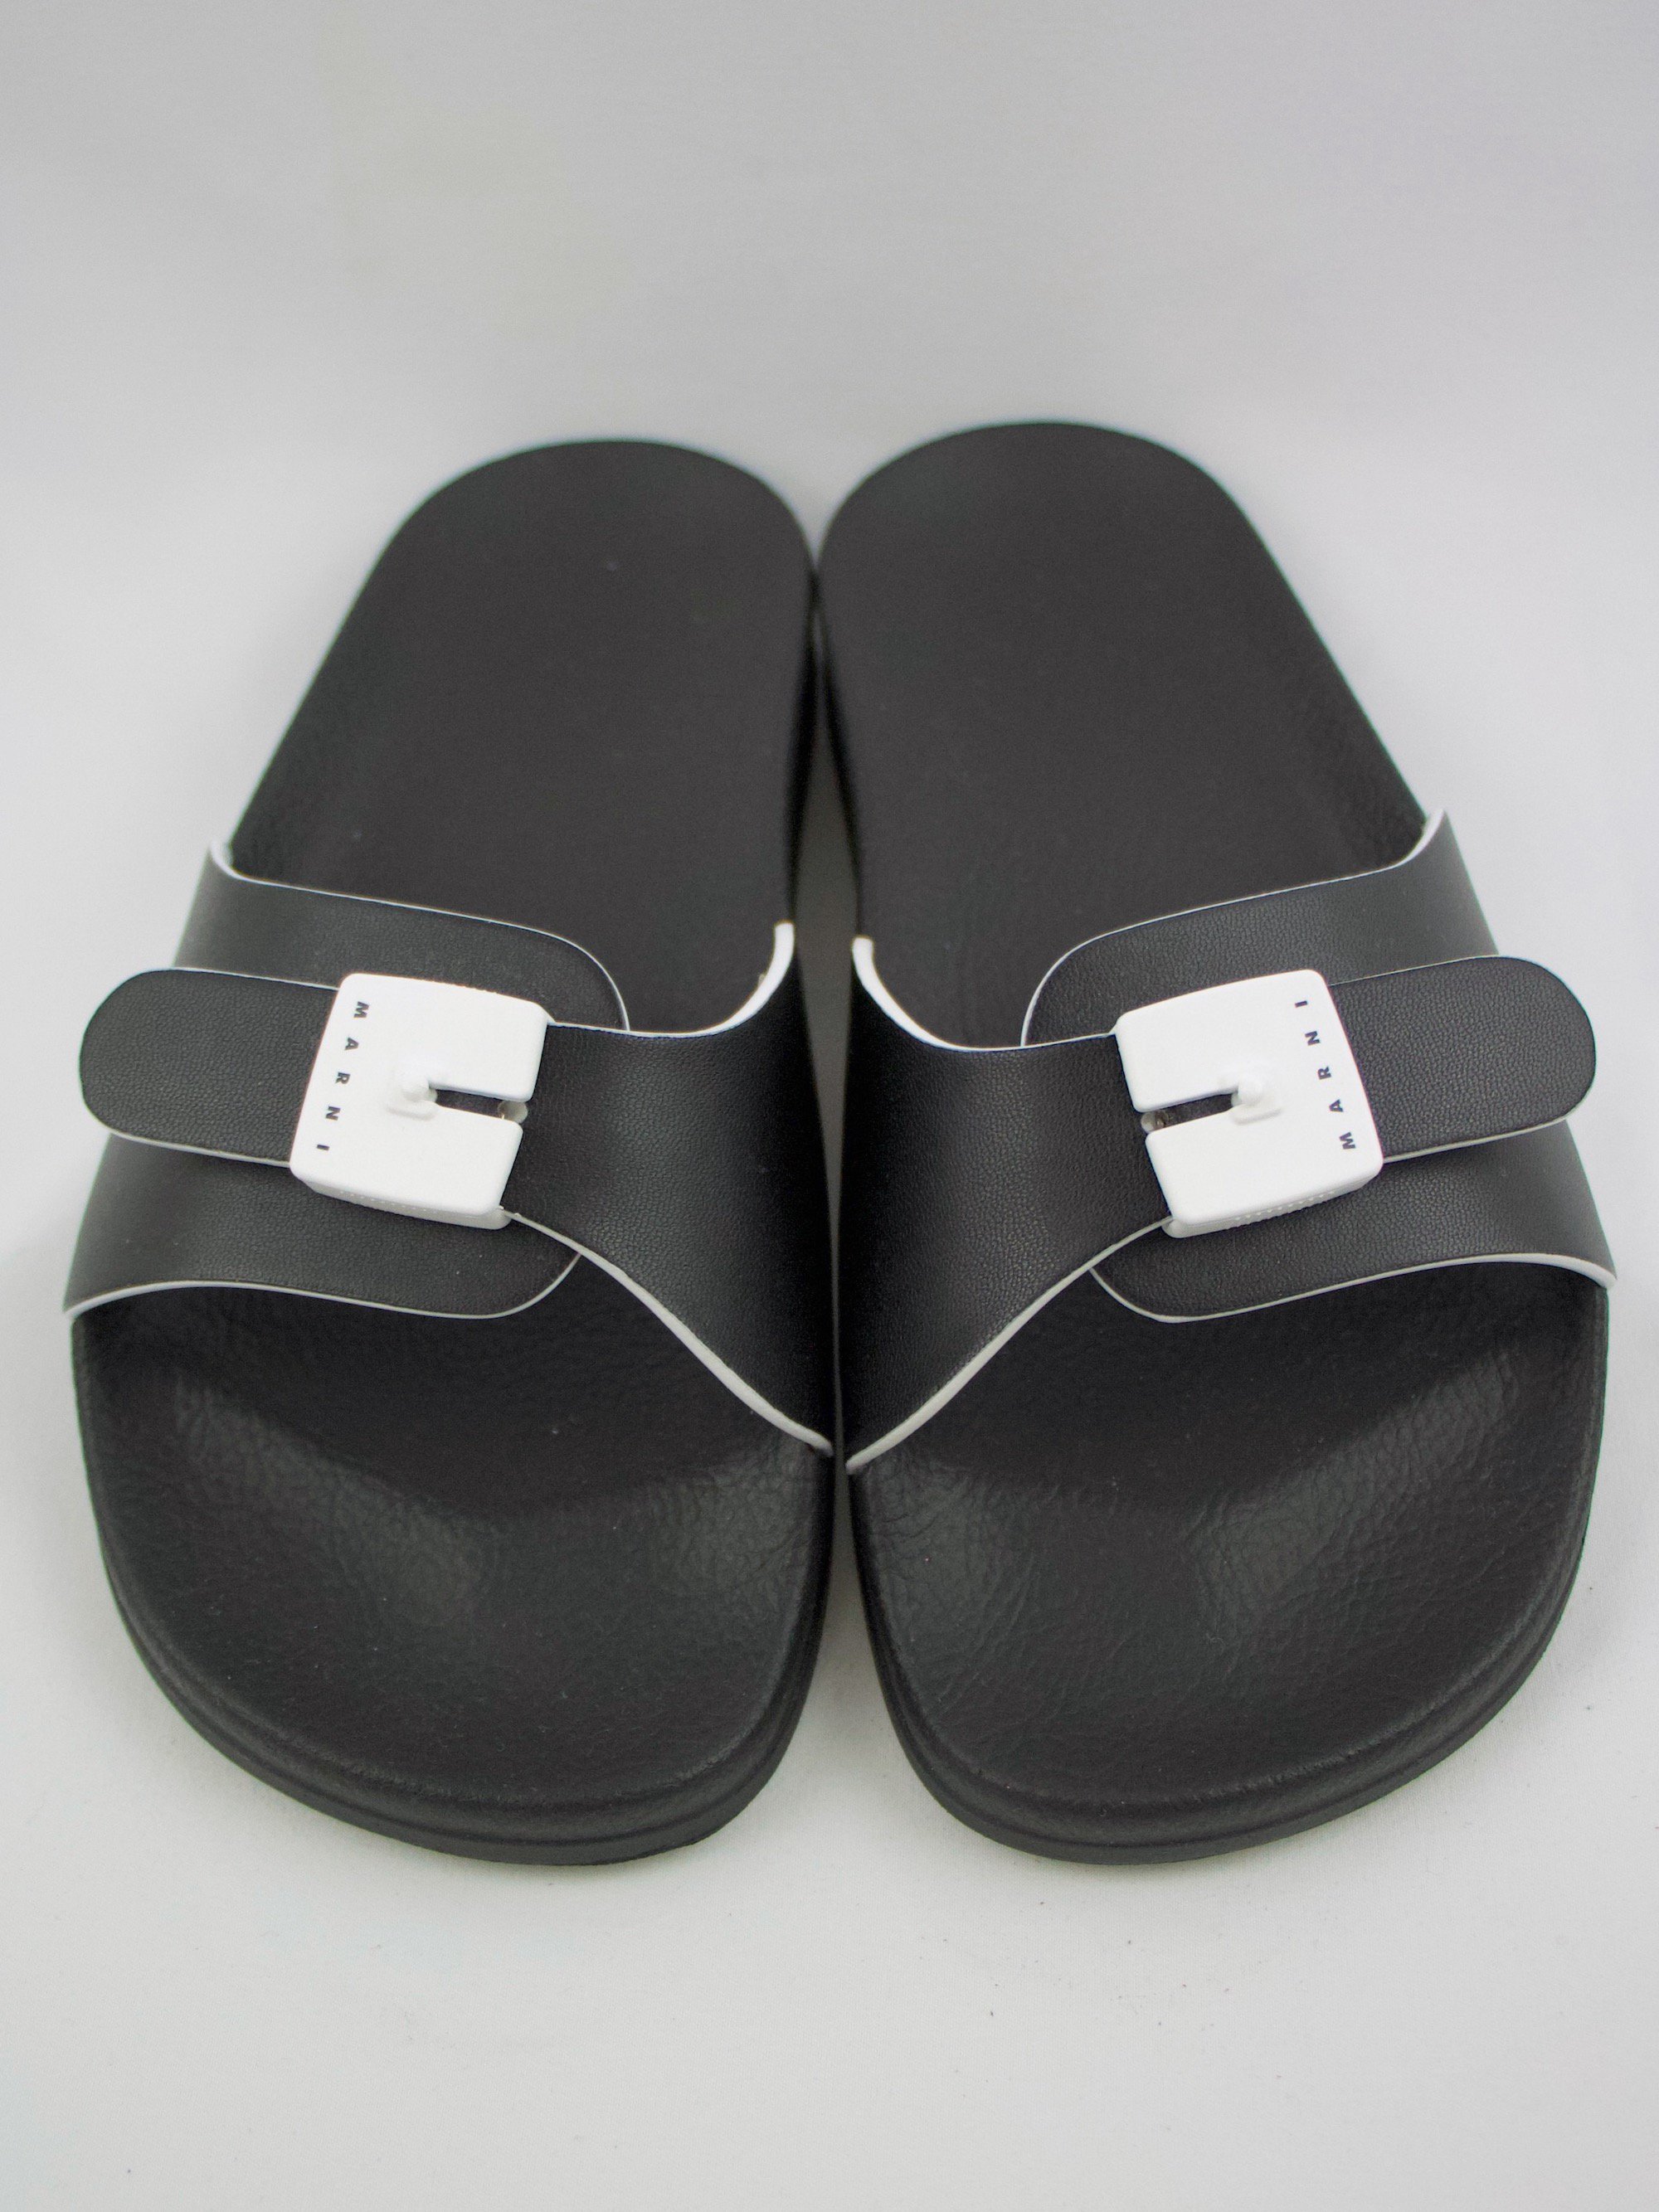 <img class='new_mark_img1' src='https://img.shop-pro.jp/img/new/icons21.gif' style='border:none;display:inline;margin:0px;padding:0px;width:auto;' />【30%OFF】MARNI Flat sandal